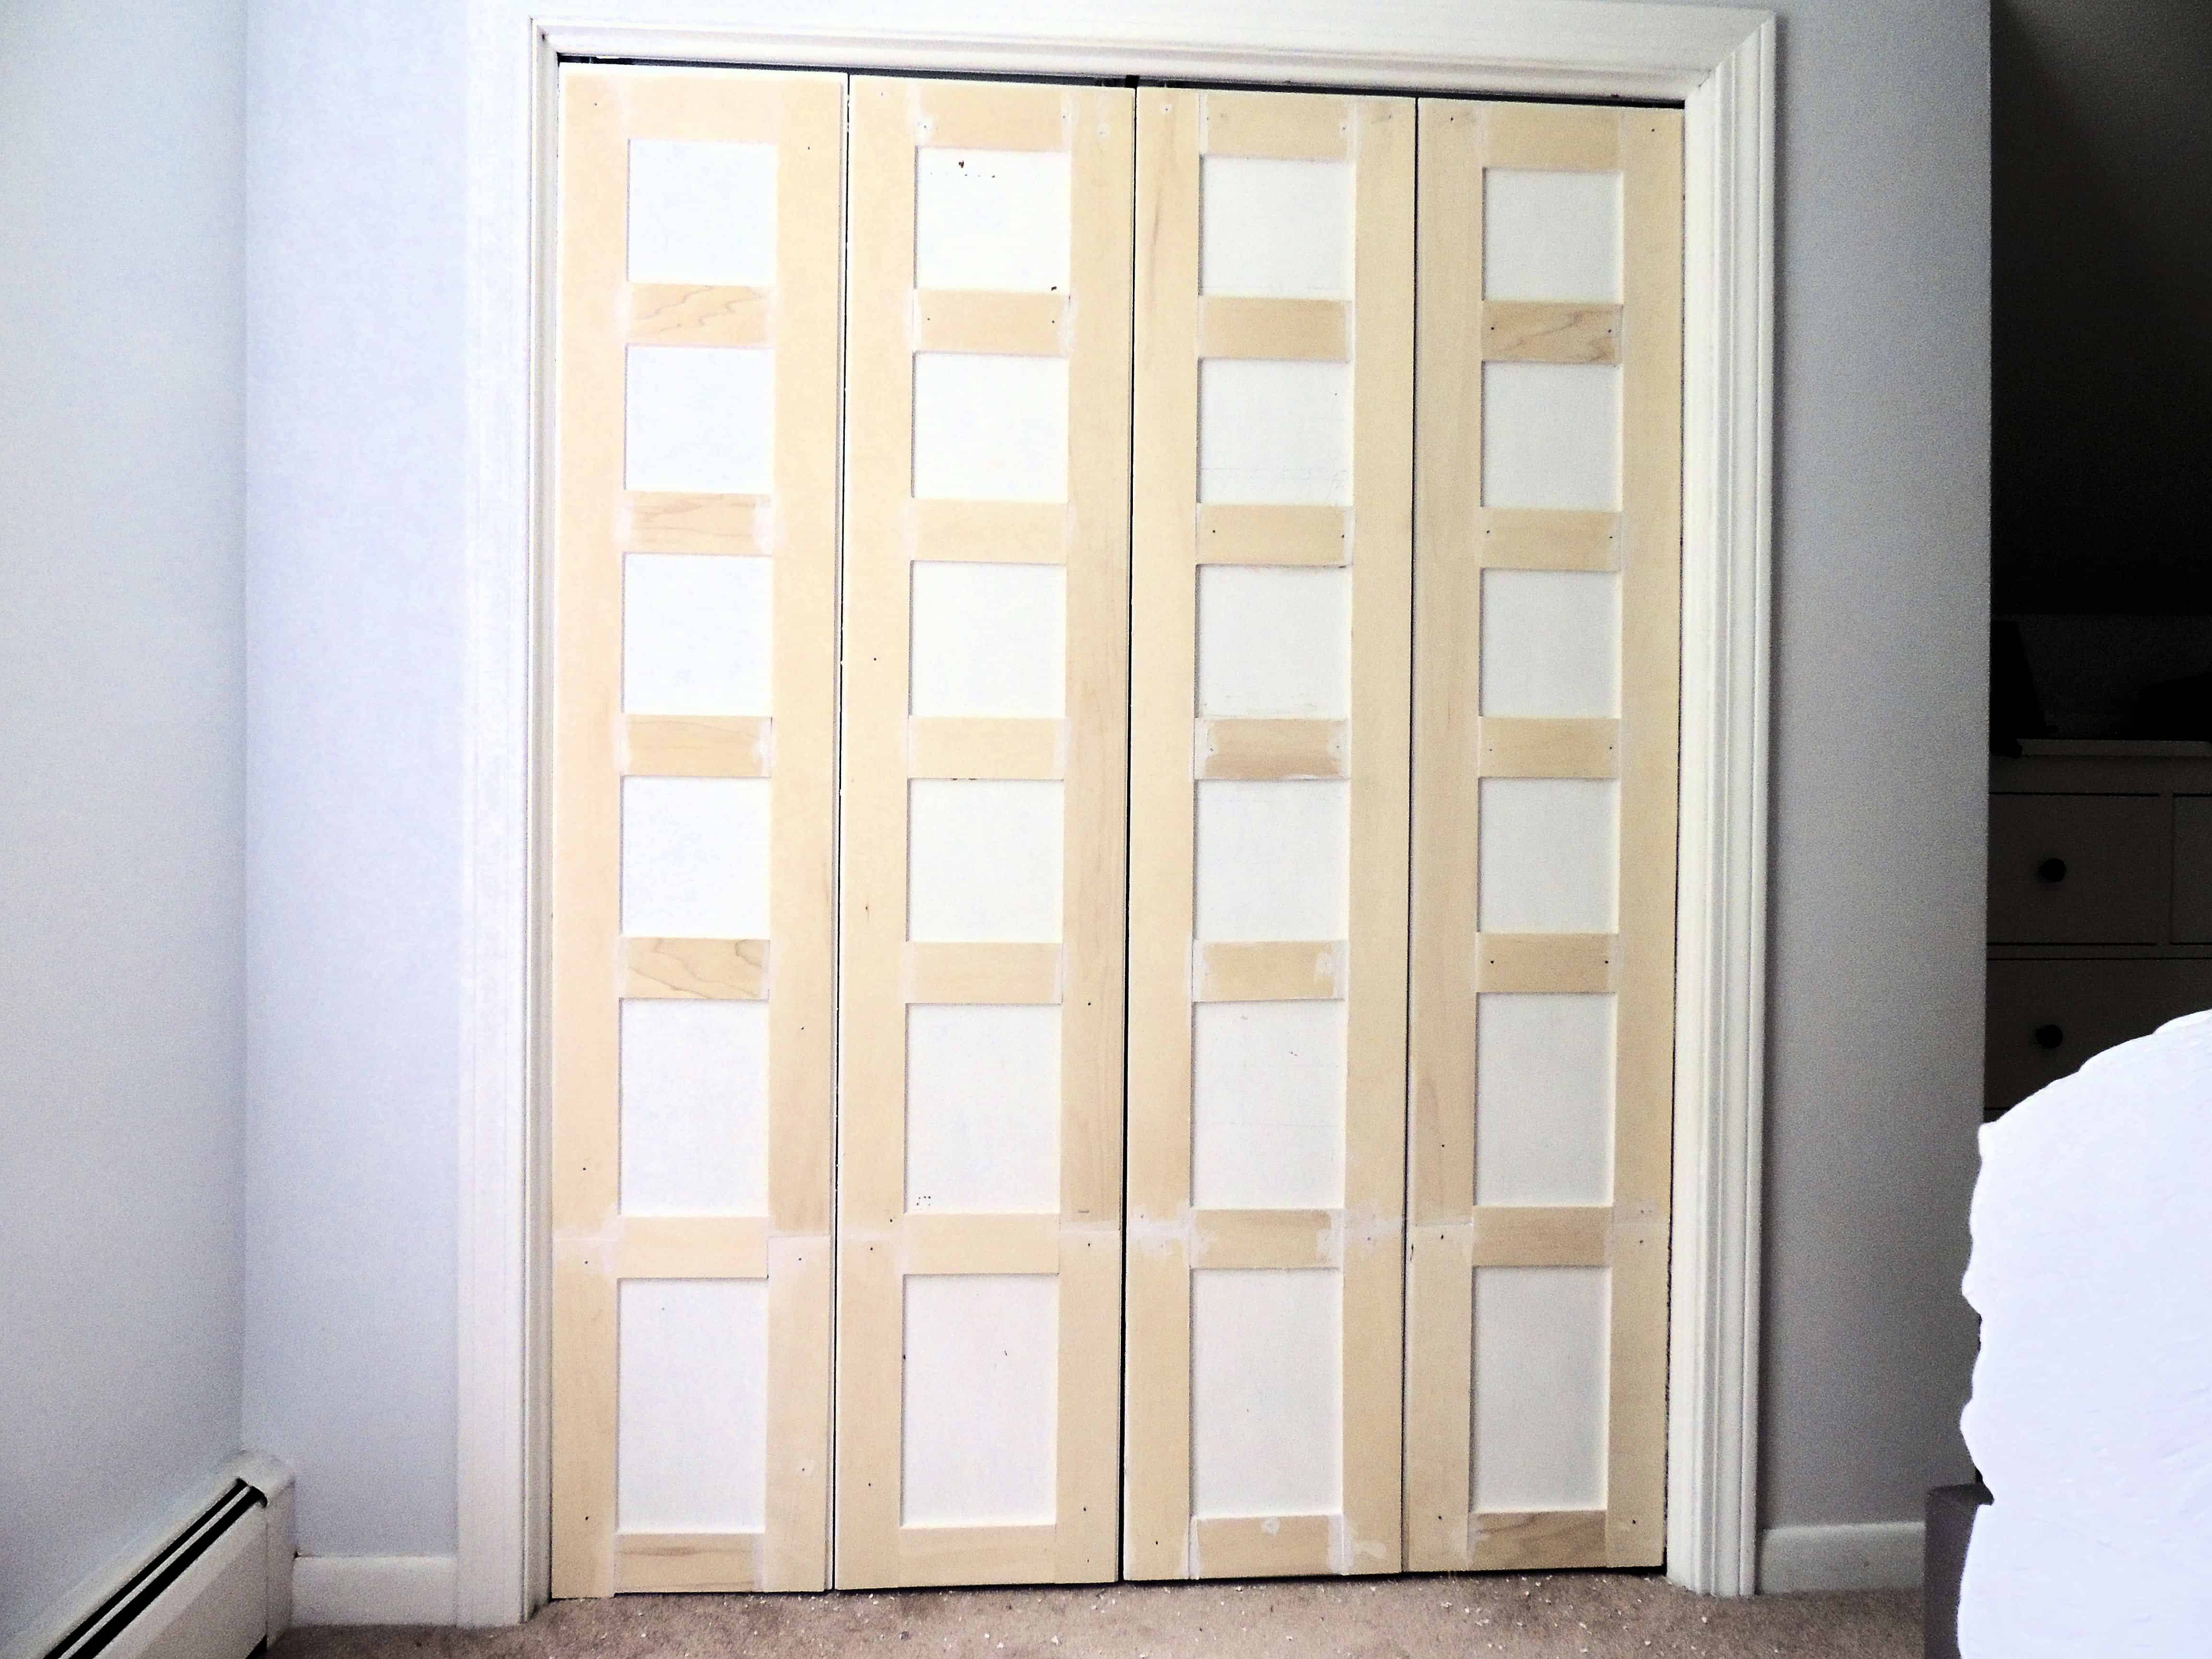 The trim pieces are attached to the doors, still unpainted. The makeover is almost complete!